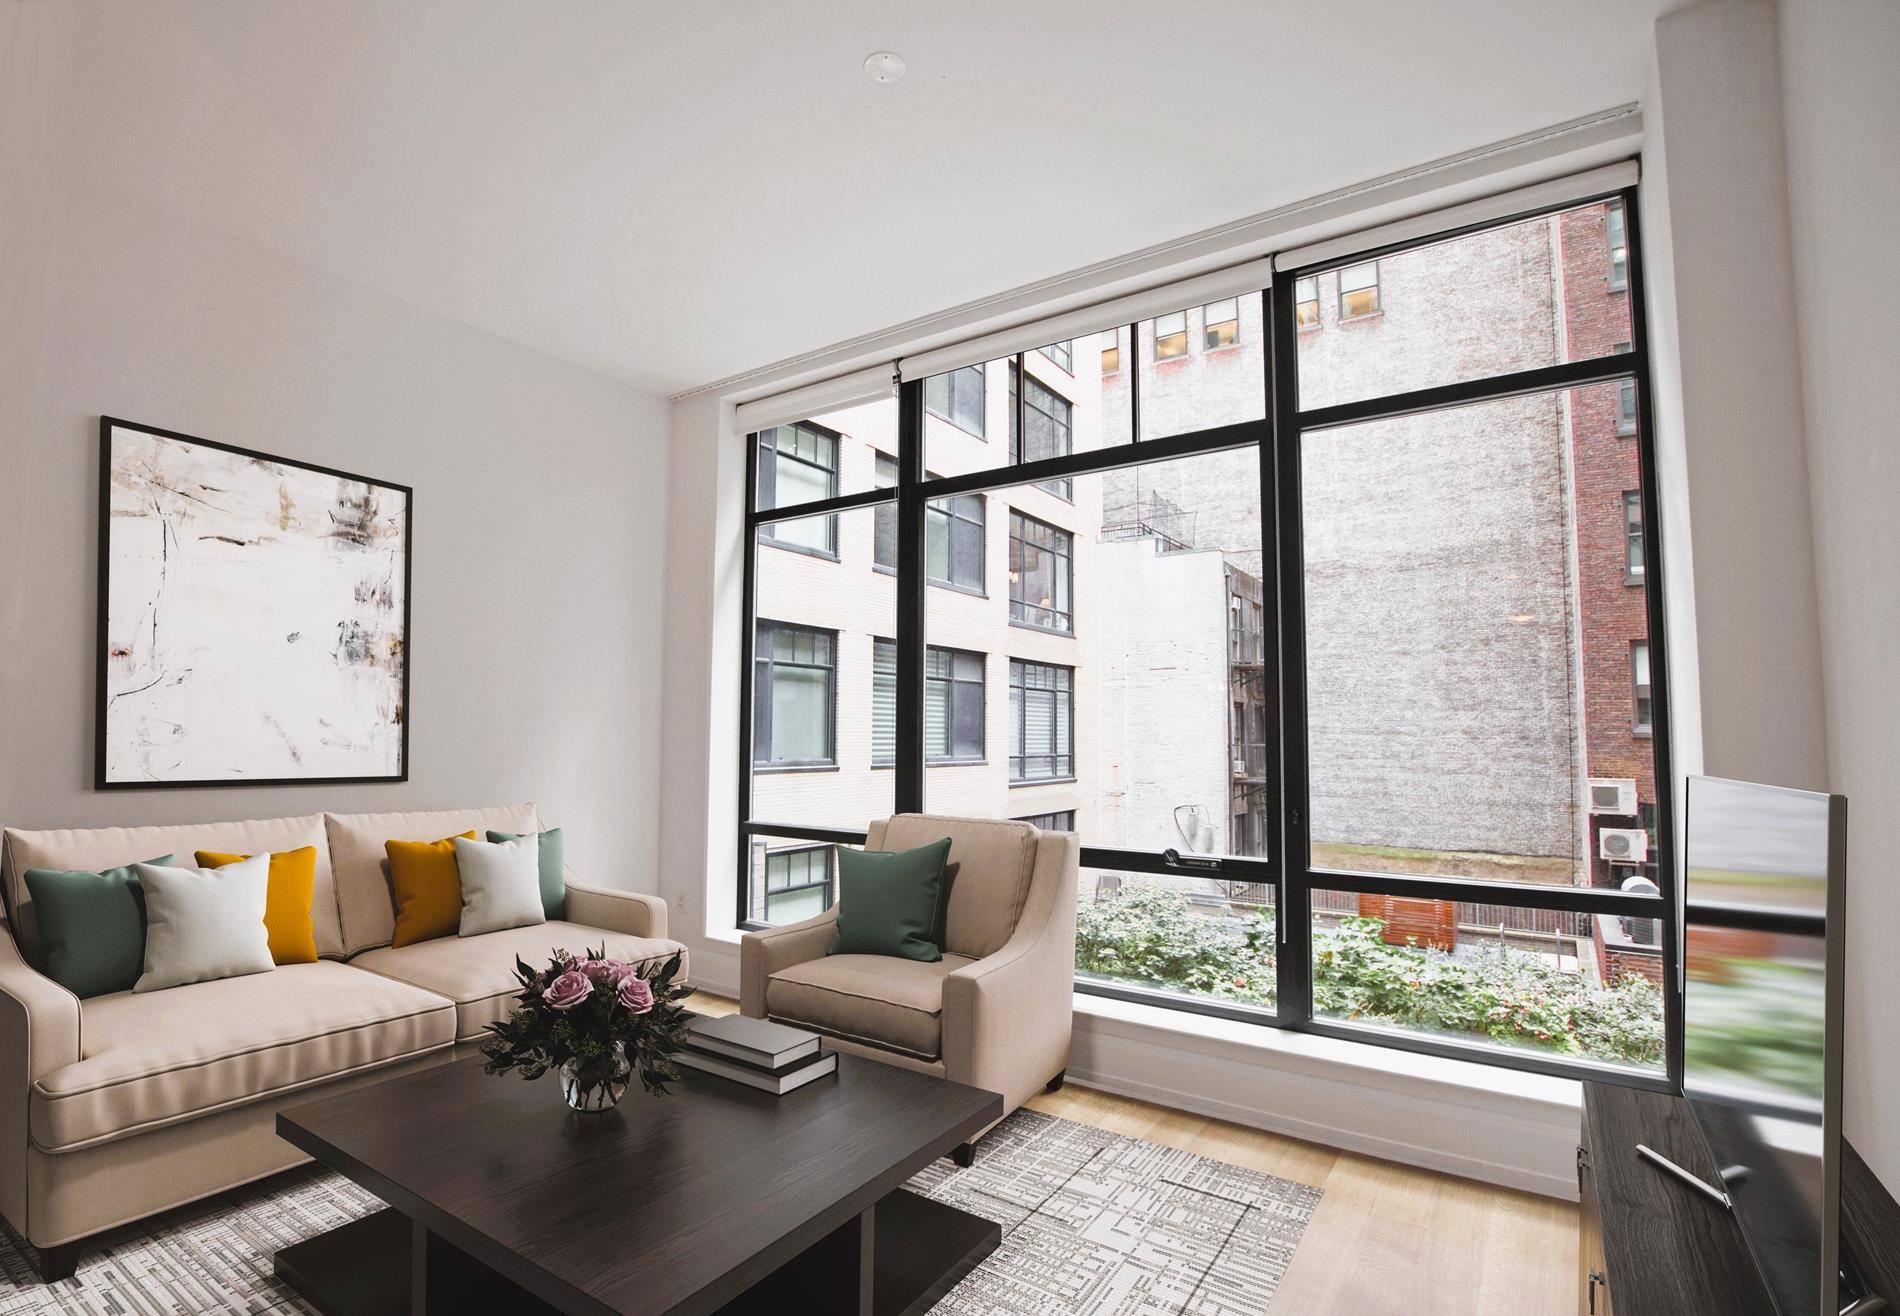 This stunning and gracious 1 bedroom 1 bathroom home with high 11 foot ceilings has a magnificent garden view from oversized floor to ceiling windows.